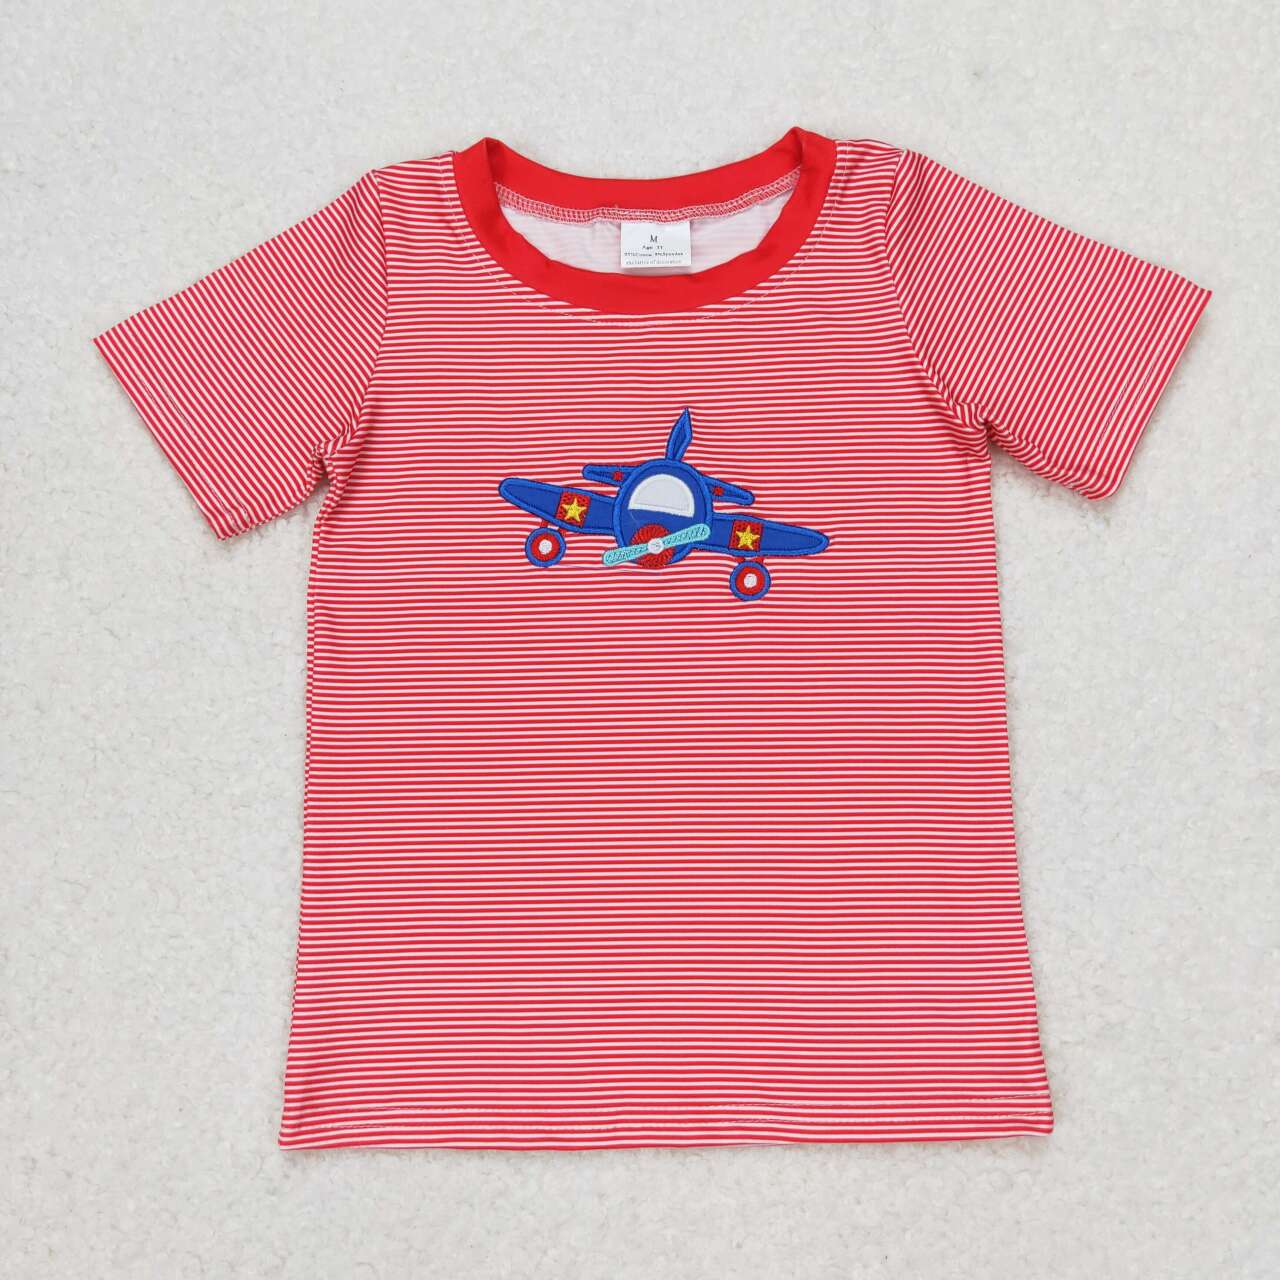 BT0594  Plane Embroidery Red Stripes Boys Tee Shirts Top